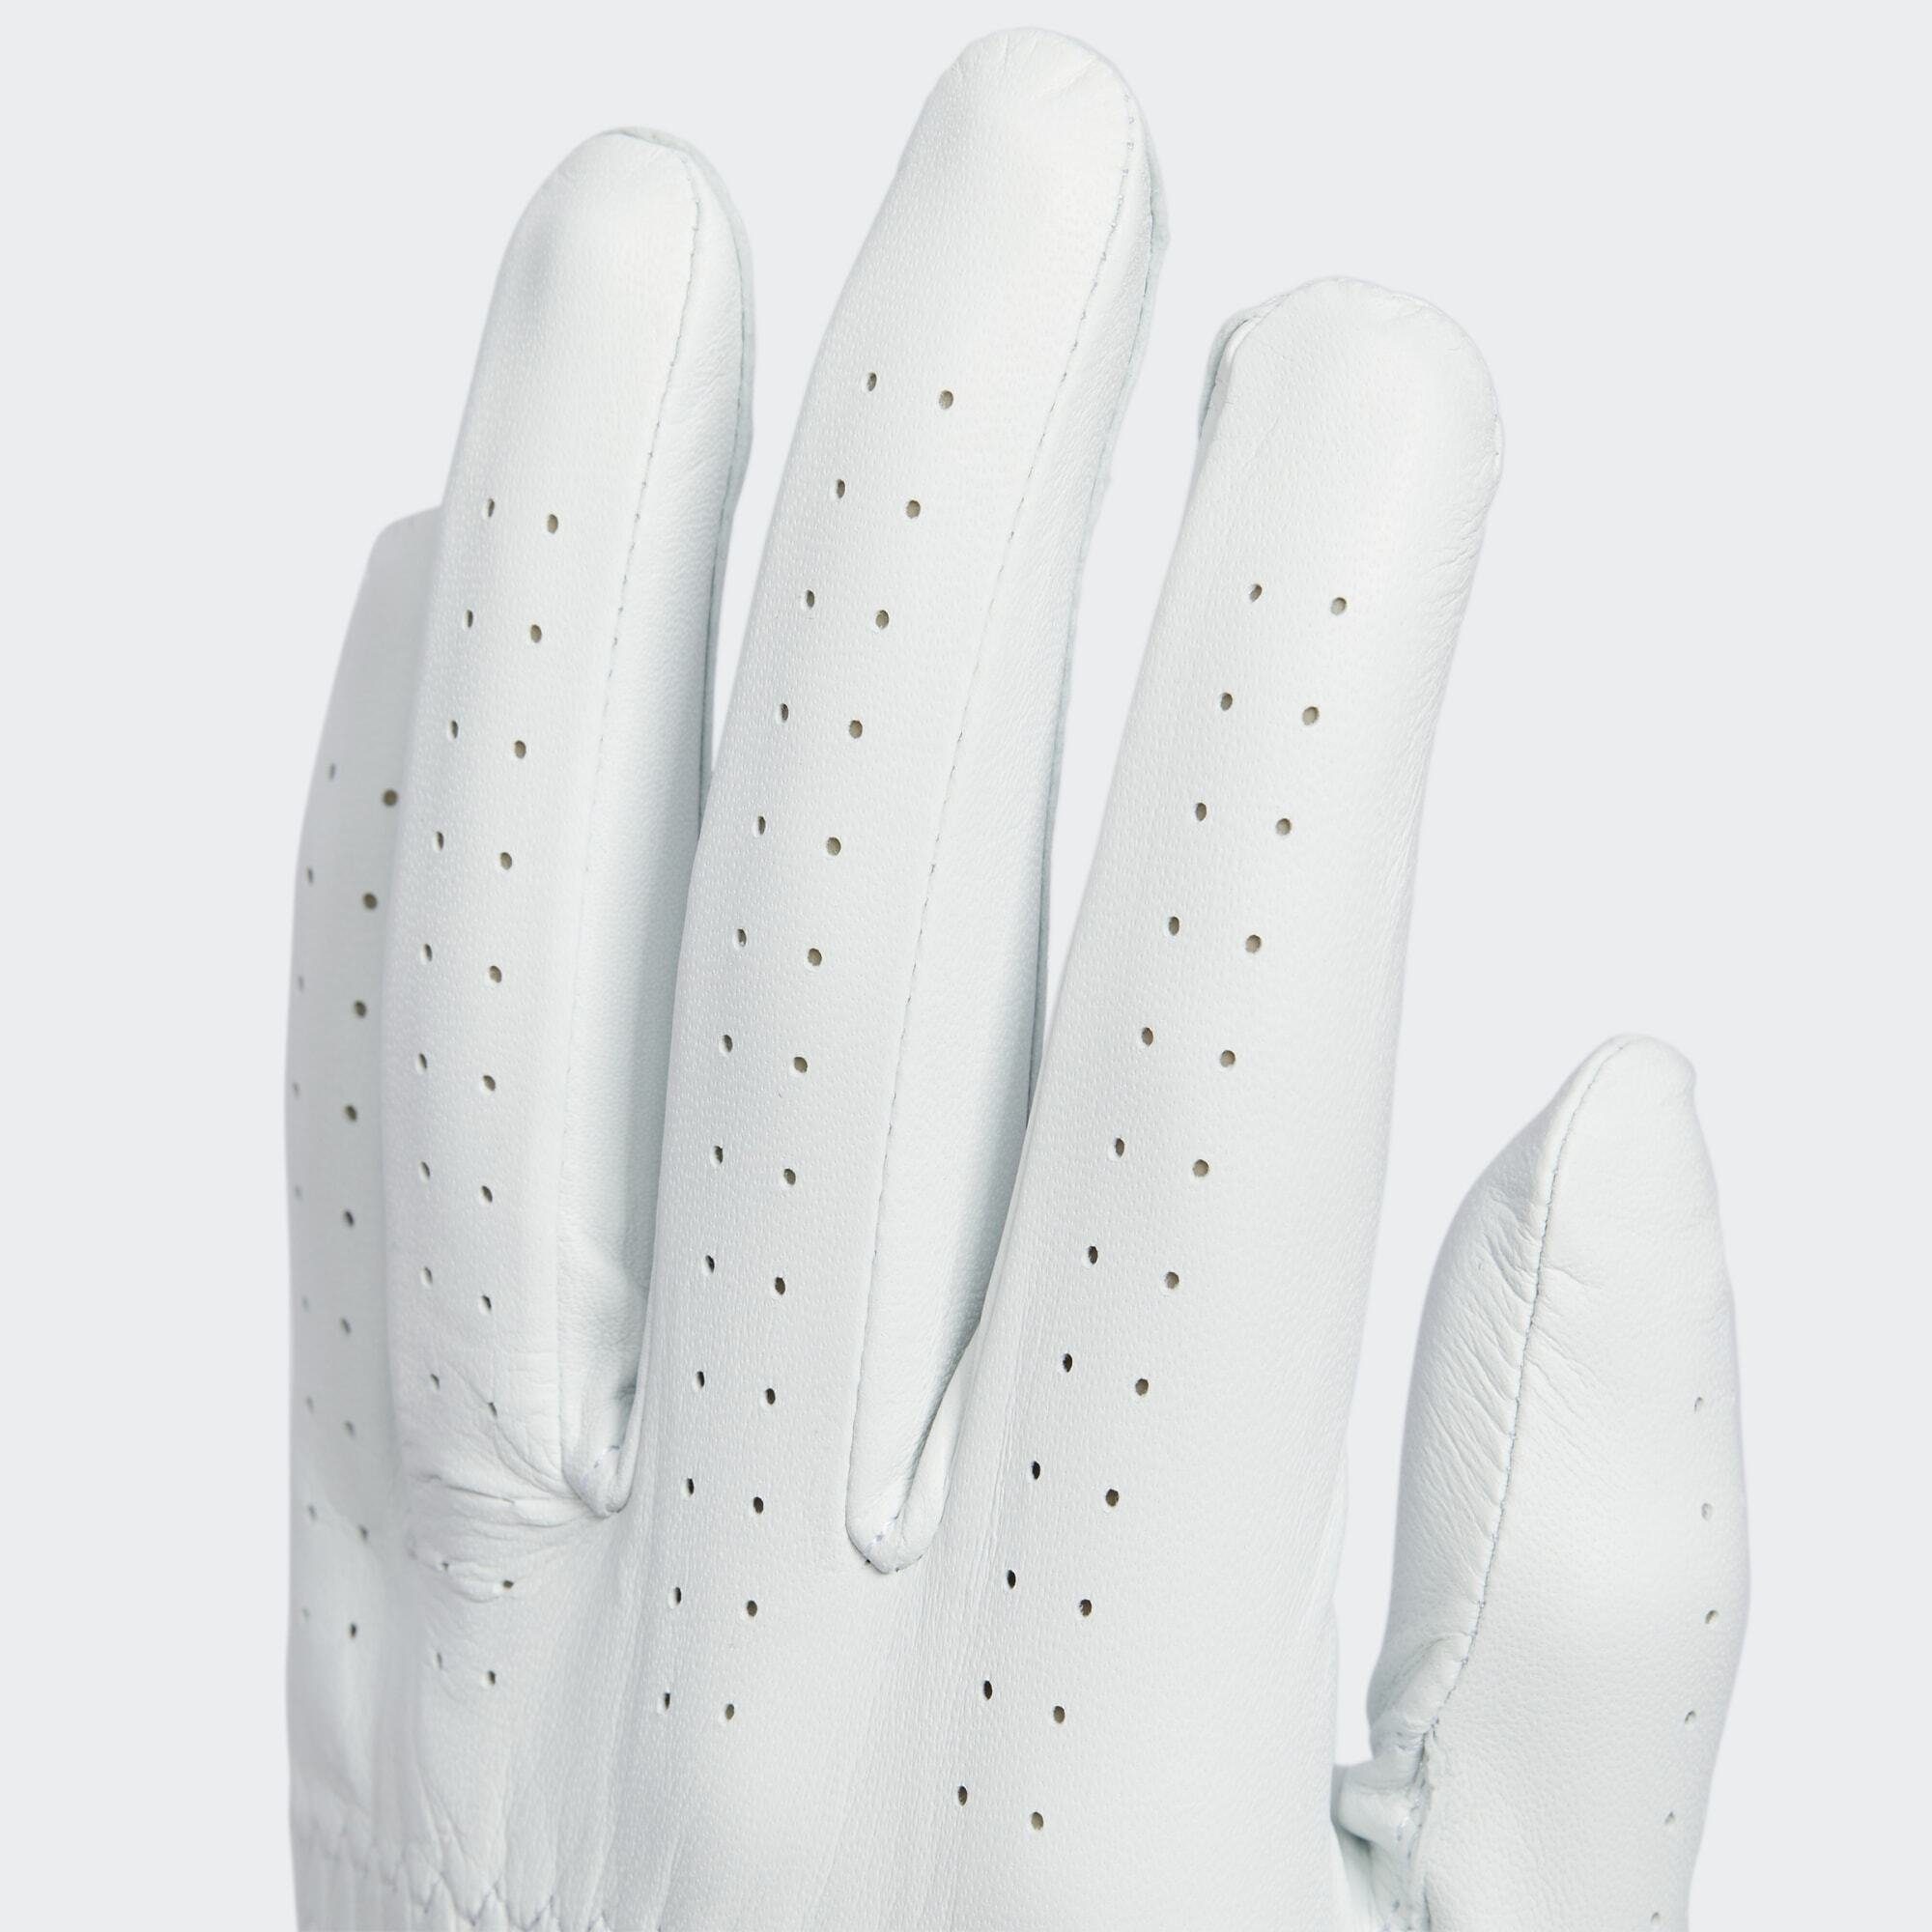 ULTIMATE HANDSCHUH SINGLE adidas LEATHER Performance Golfhandschuhe